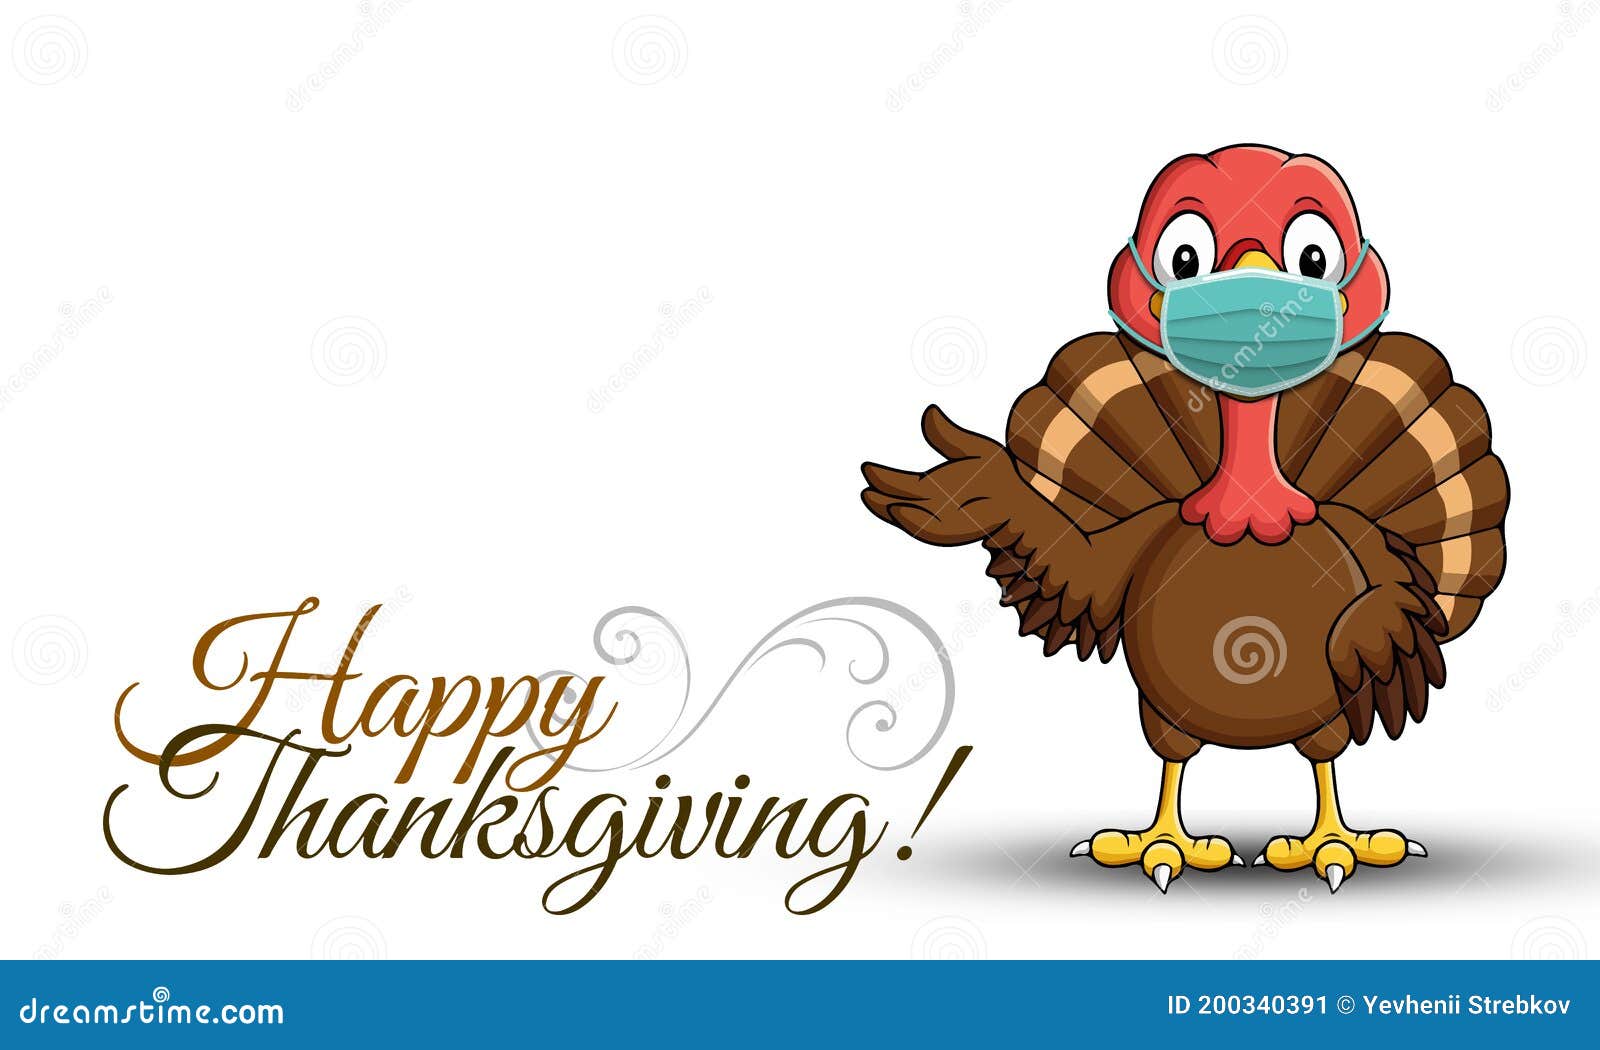 Thanksgiving-themed image. Thanksgiving holiday concept